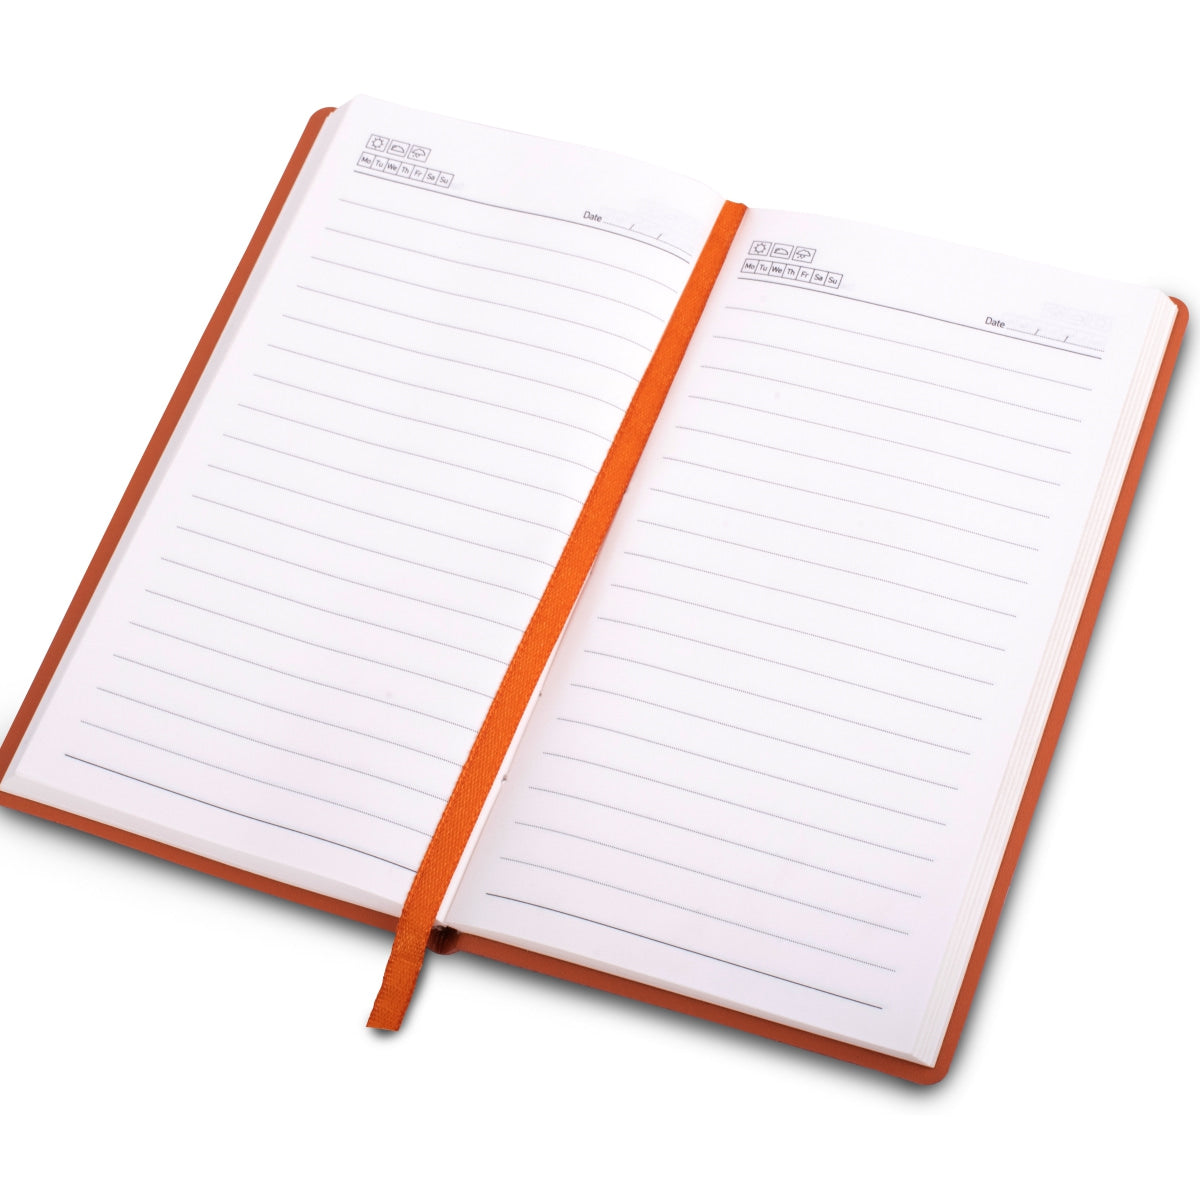 A6 Size Corporate Notebook Diary - For Office Use, Personal Use, or Corporate Gifting BG137